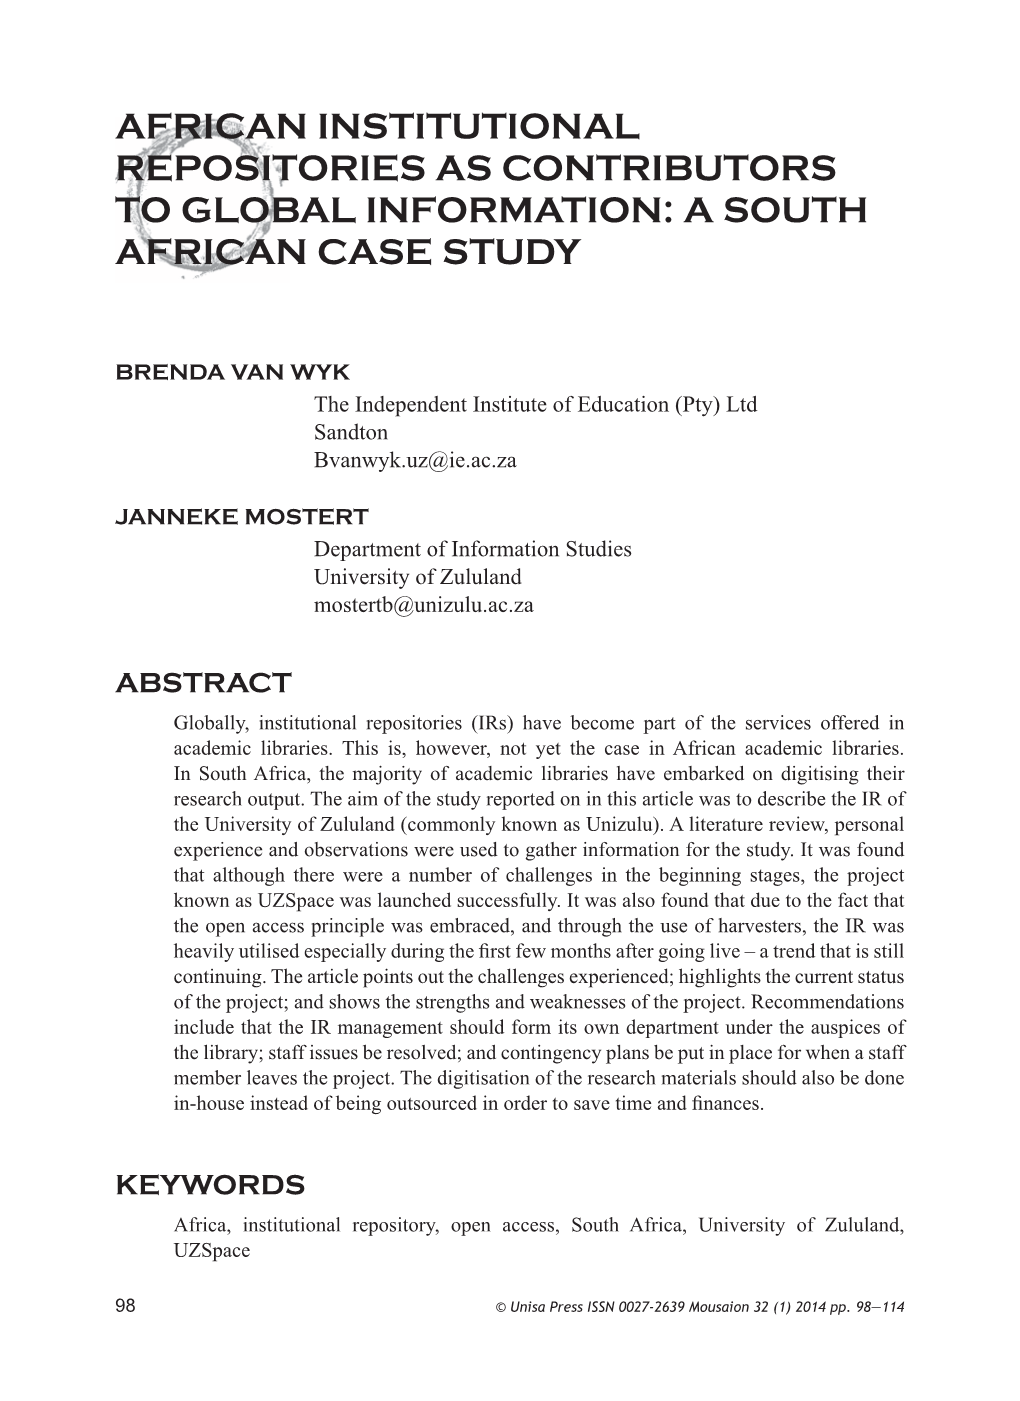 African Institutional Repositories As Contributors to Global Information: a South African Case Study